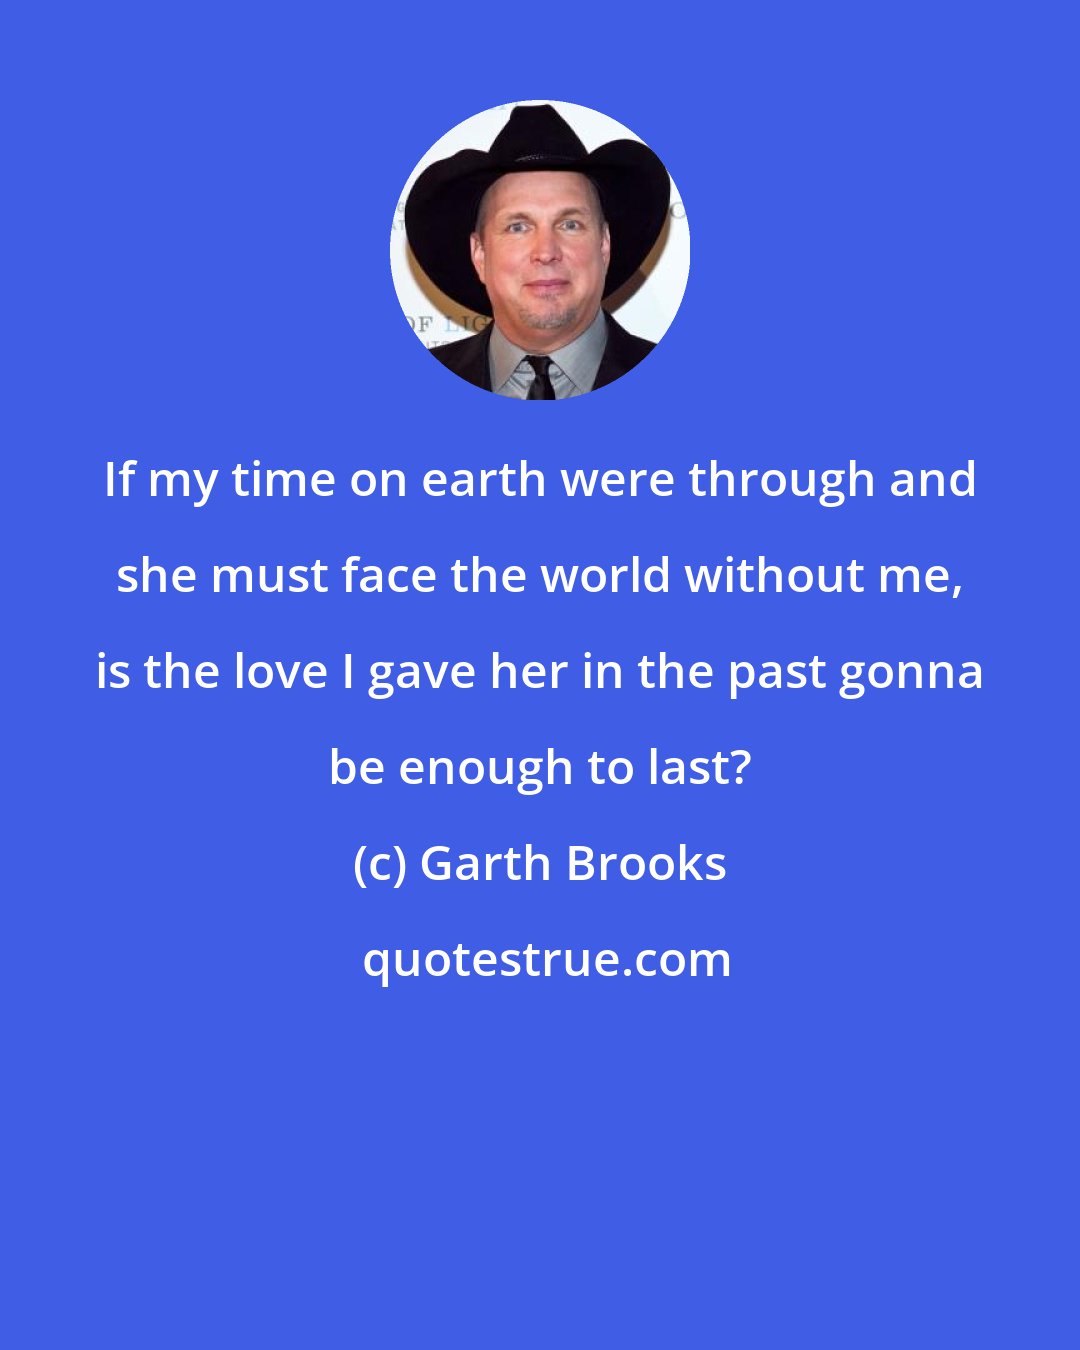 Garth Brooks: If my time on earth were through and she must face the world without me, is the love I gave her in the past gonna be enough to last?